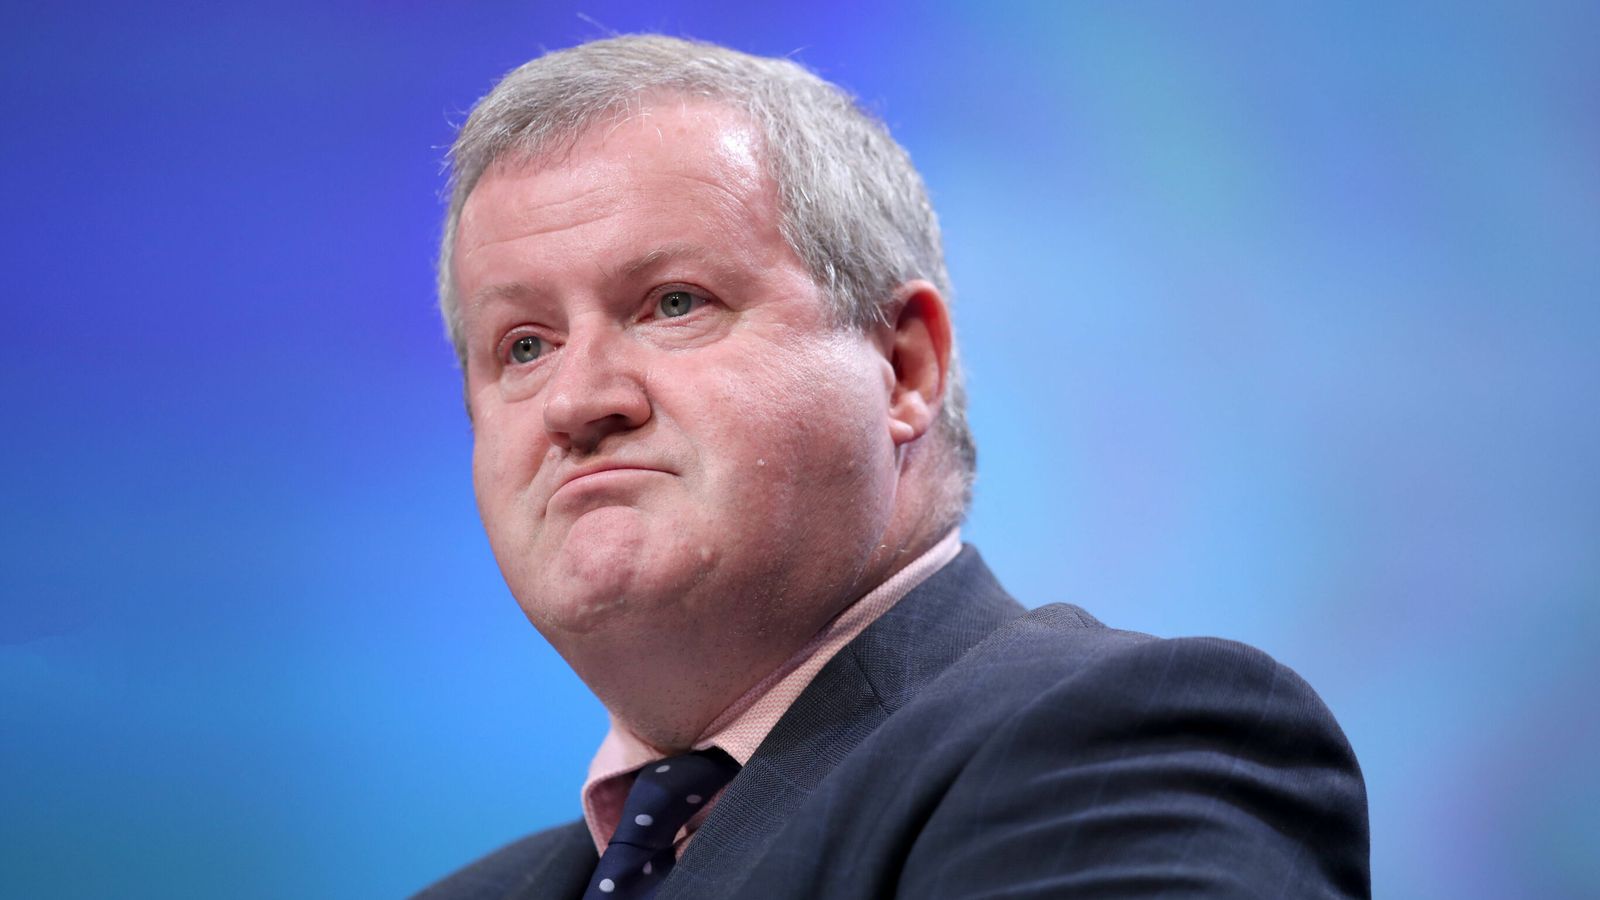 Westminster Accounts: SNP's Ian Blackford backs calls for new laws to 'clean up politics'